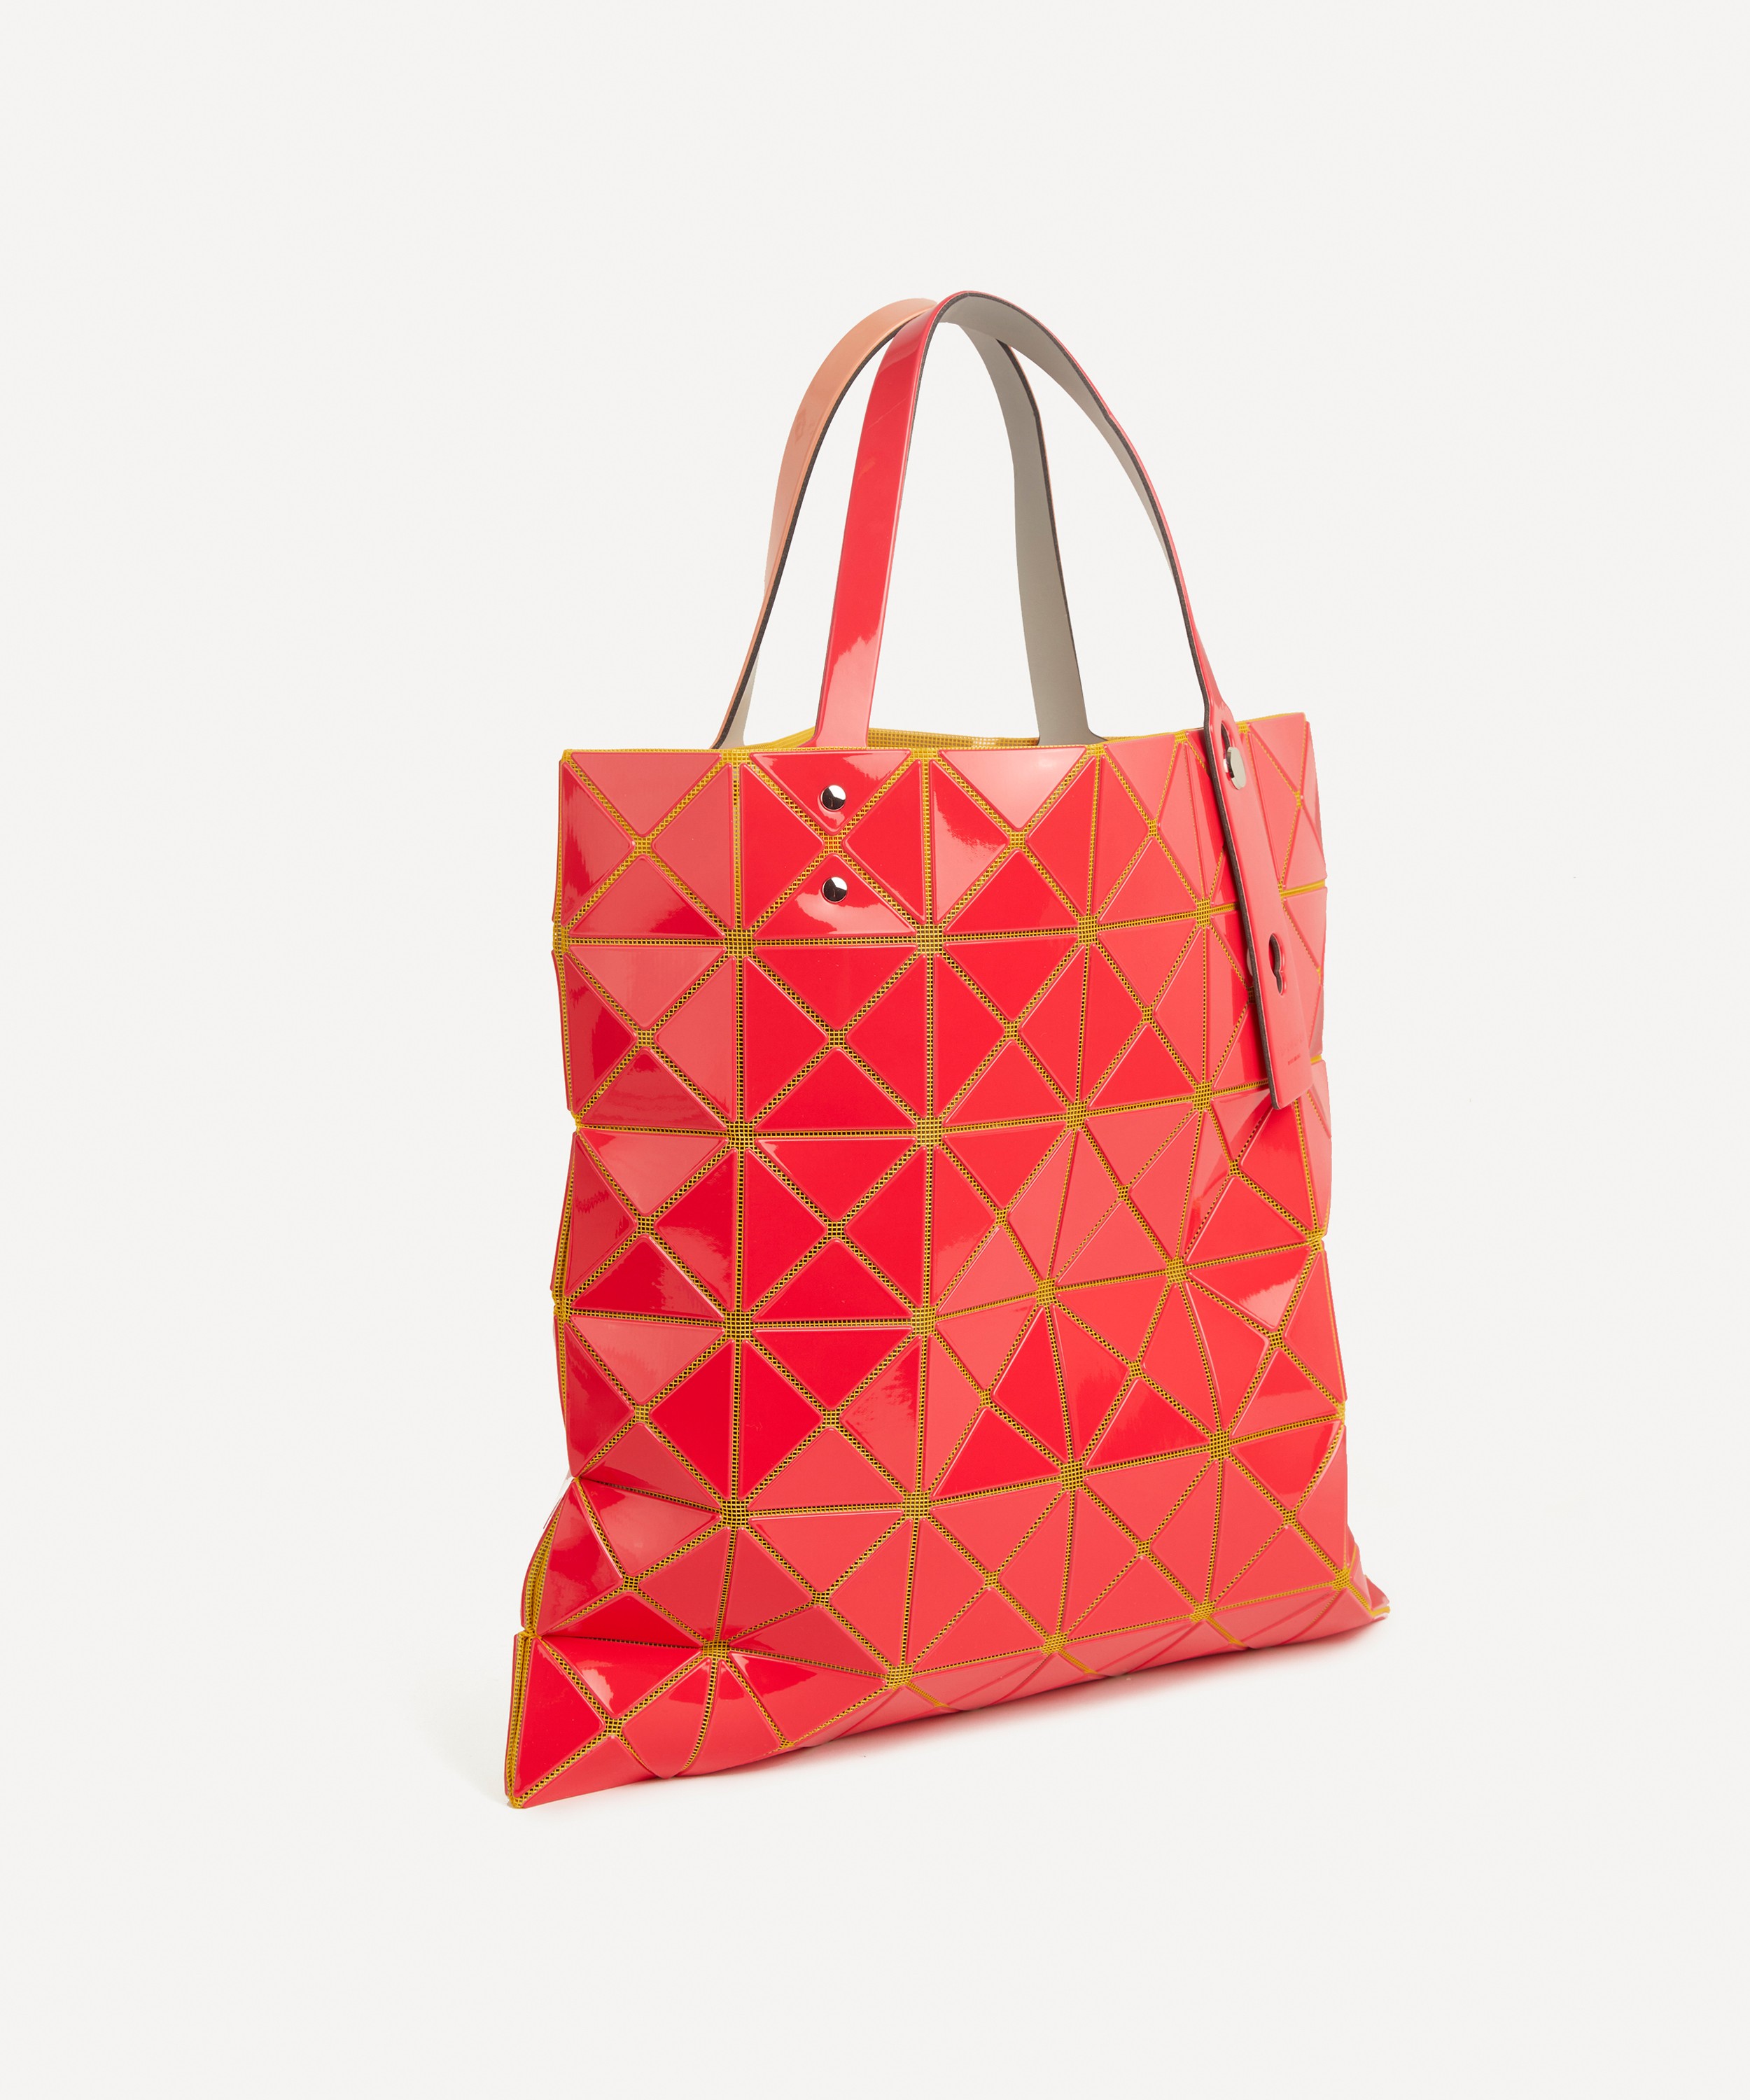 Authentic Bao Bao Issey Miyake Lucent Tote, Women's Fashion, Bags